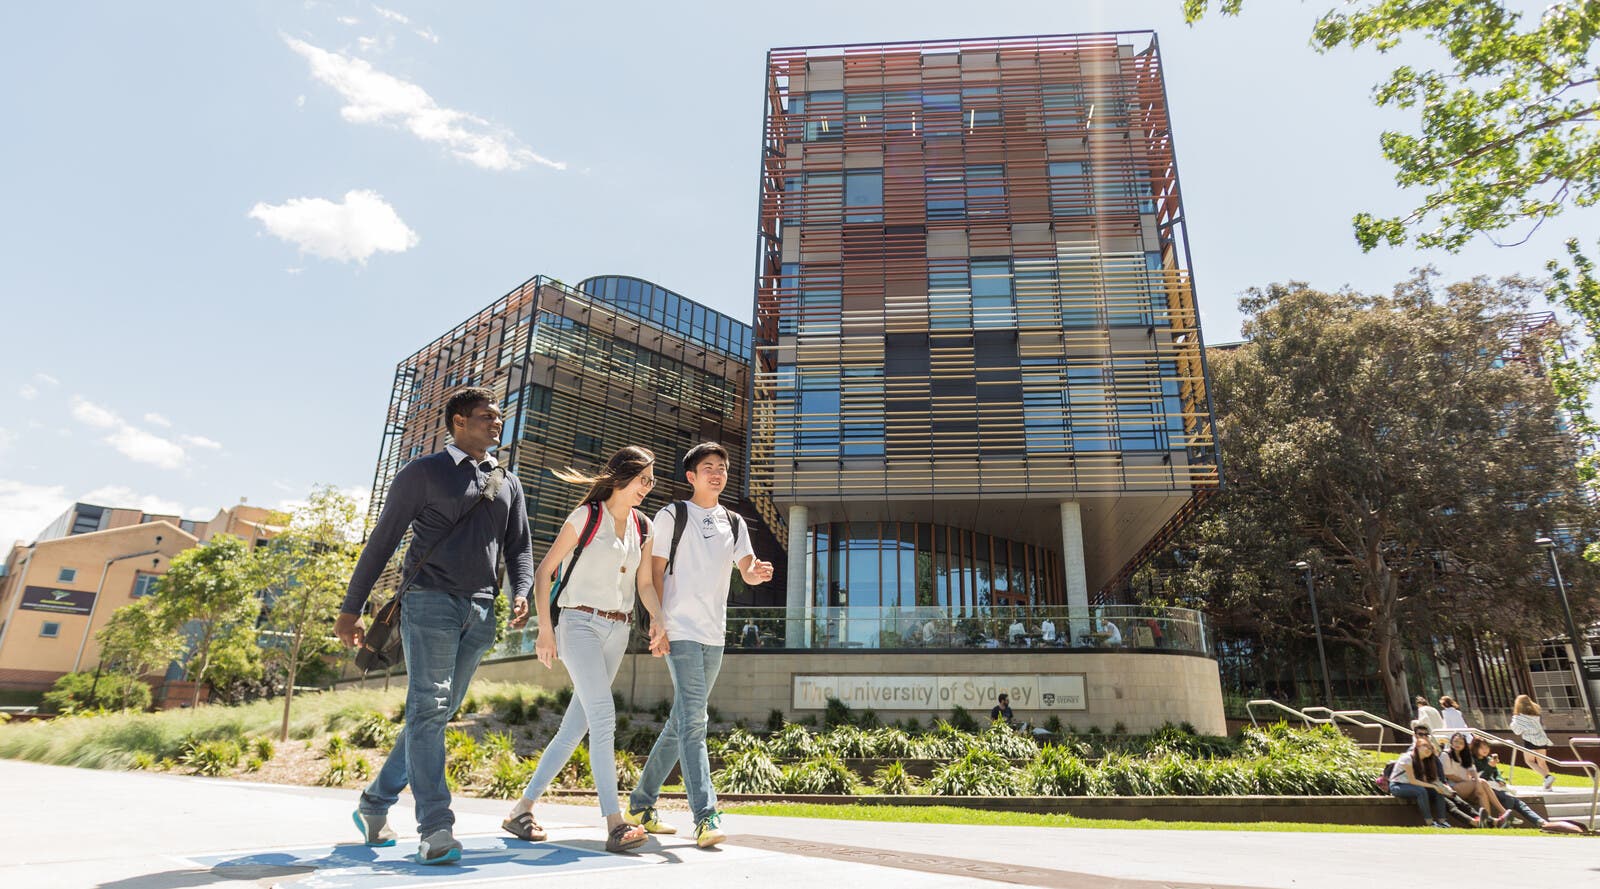 Taylors College Sydney students walking together on campus